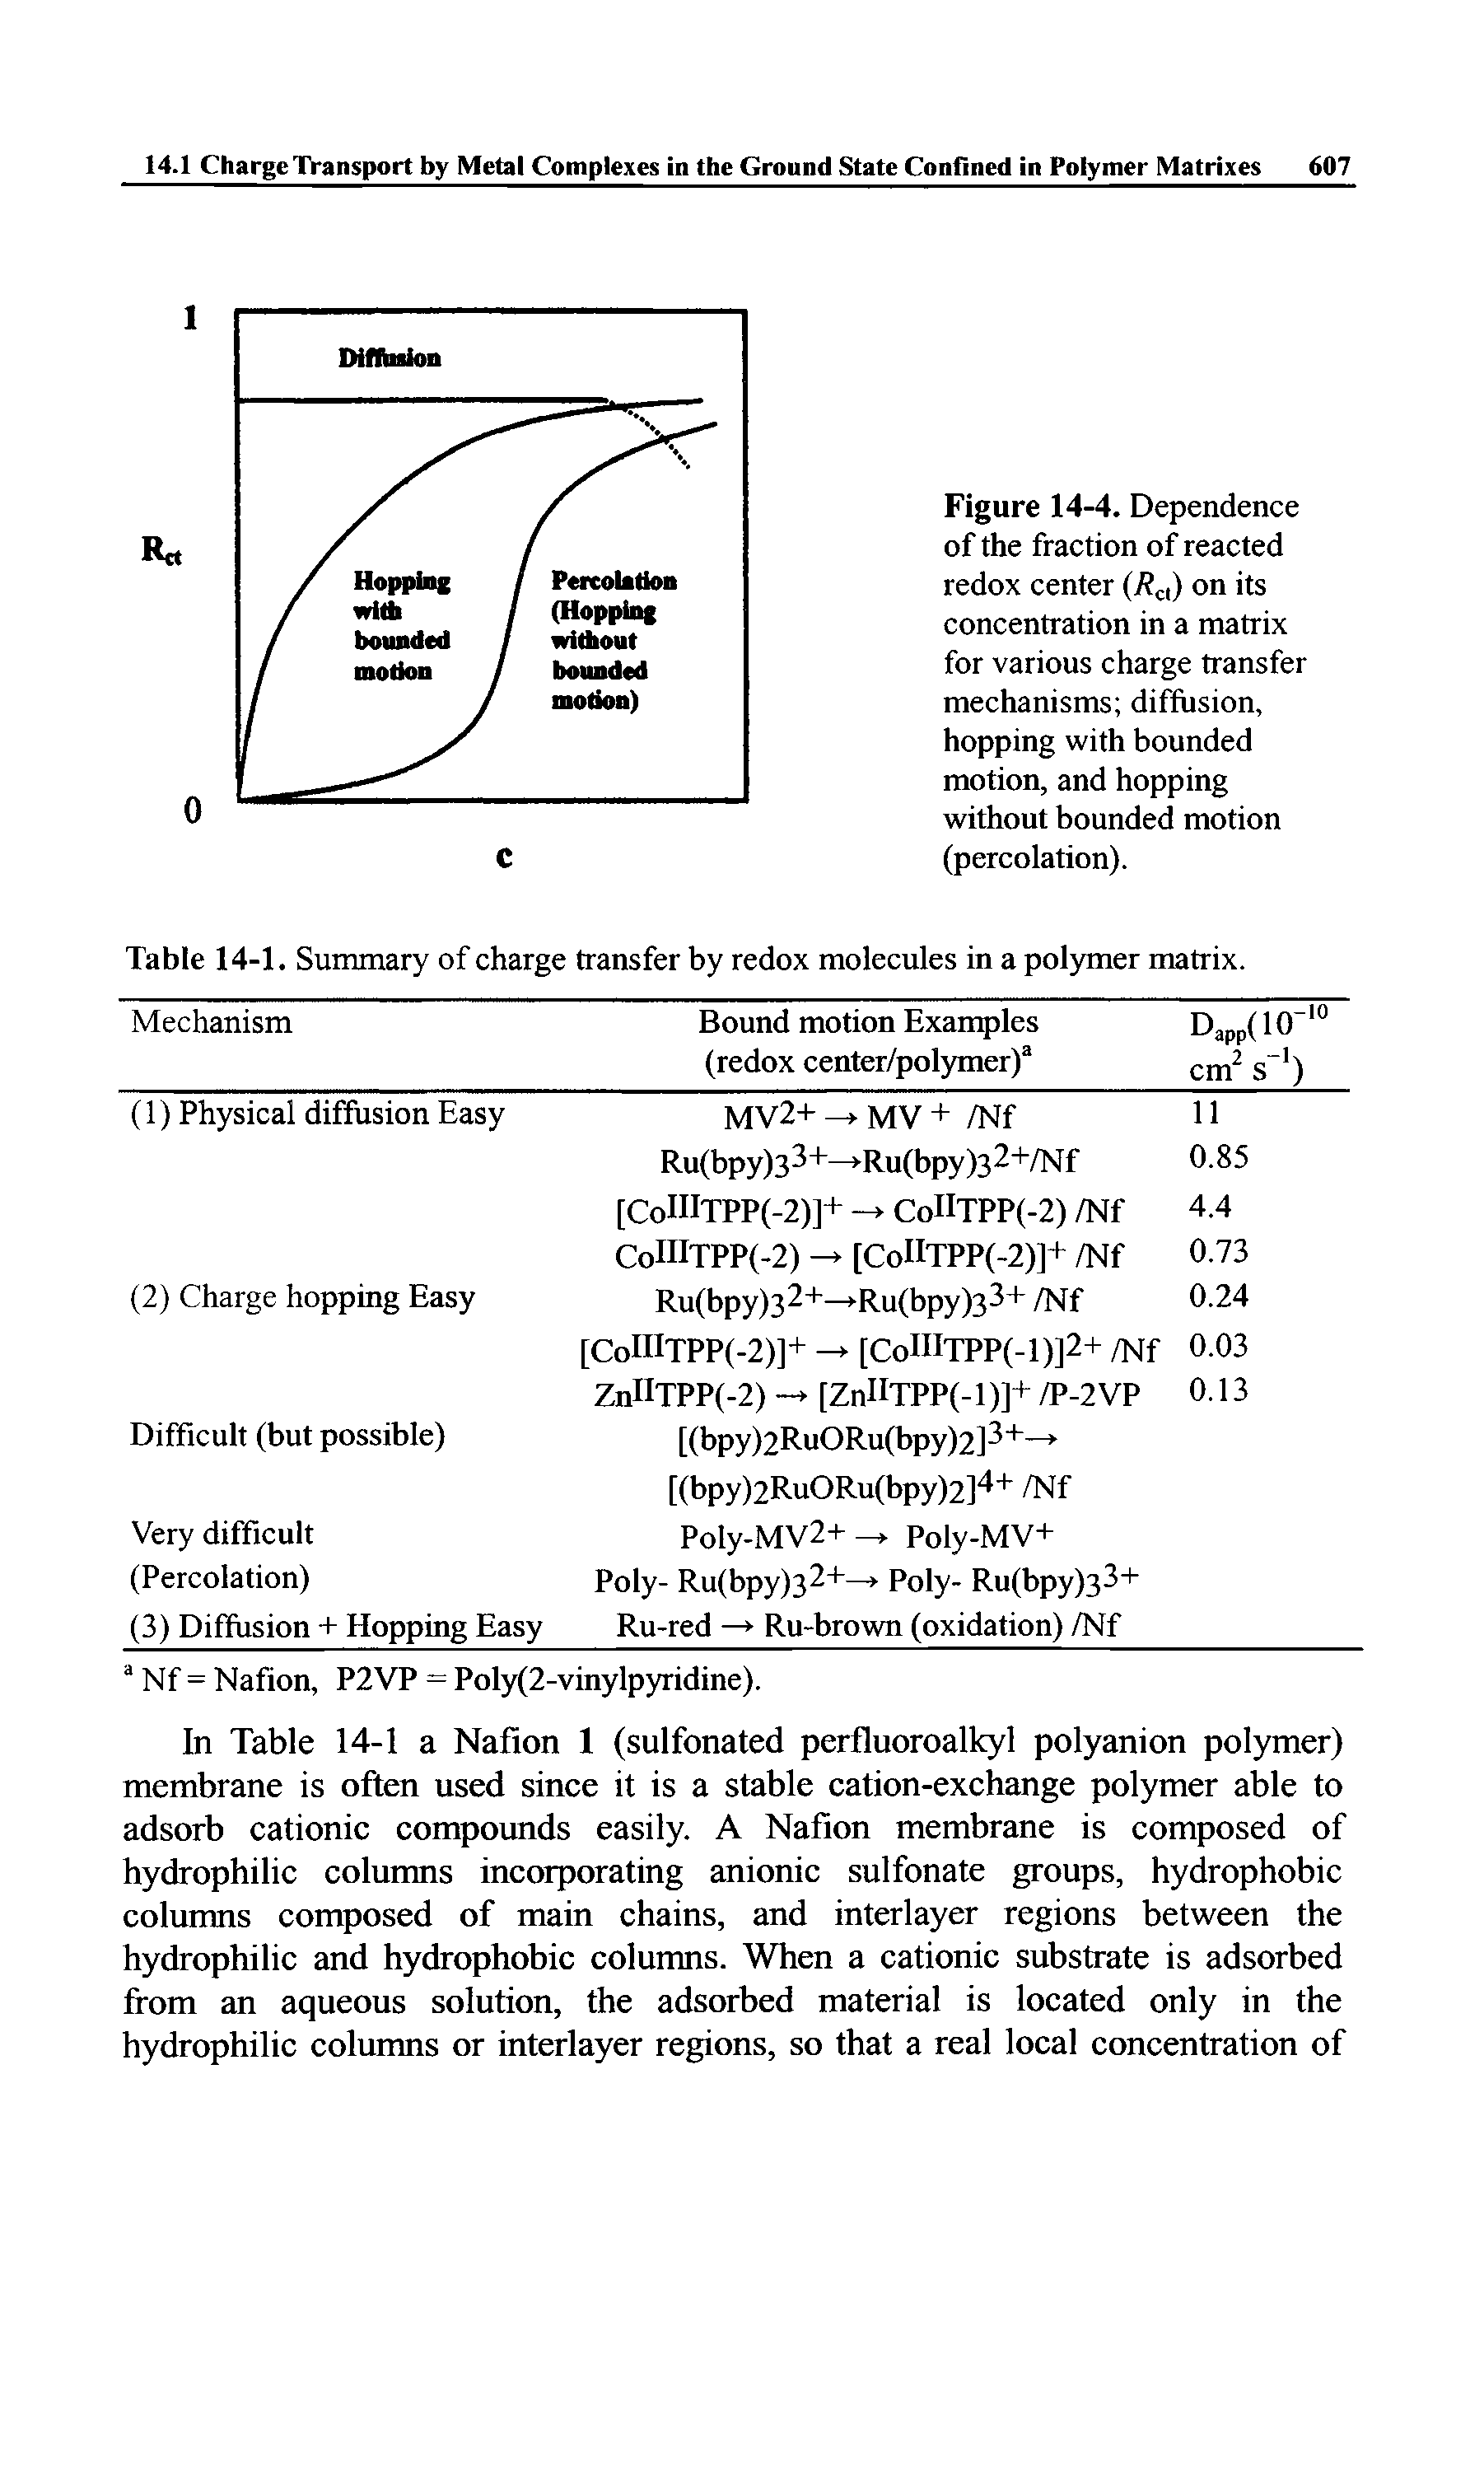 Figure 14-4. Dependence of the fraction of reacted redox center (R ) on its concentration in a matrix for various charge transfer mechanisms diffusion, hopping with bounded motion, and hopping without bounded motion (percolation).